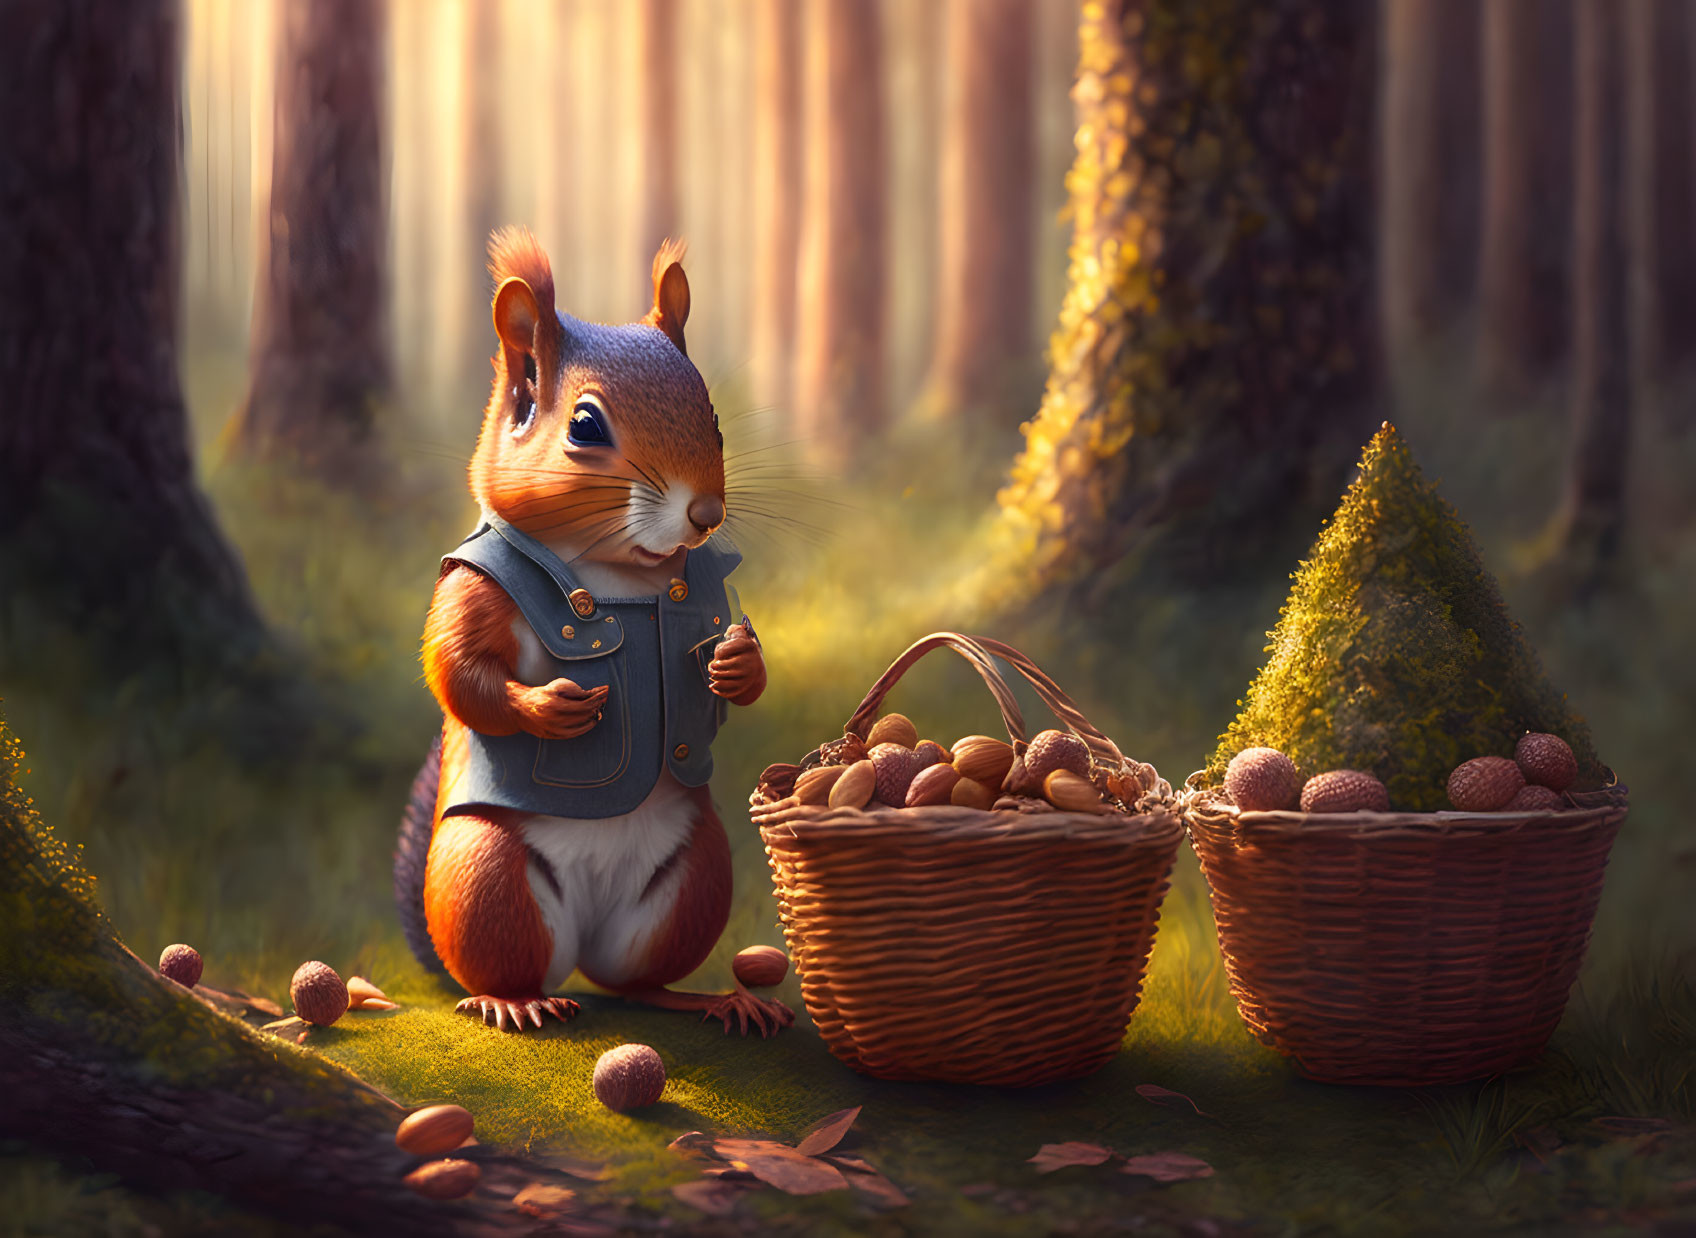 Anthropomorphic squirrel in blue coat with baskets of nuts in sunlit forest.